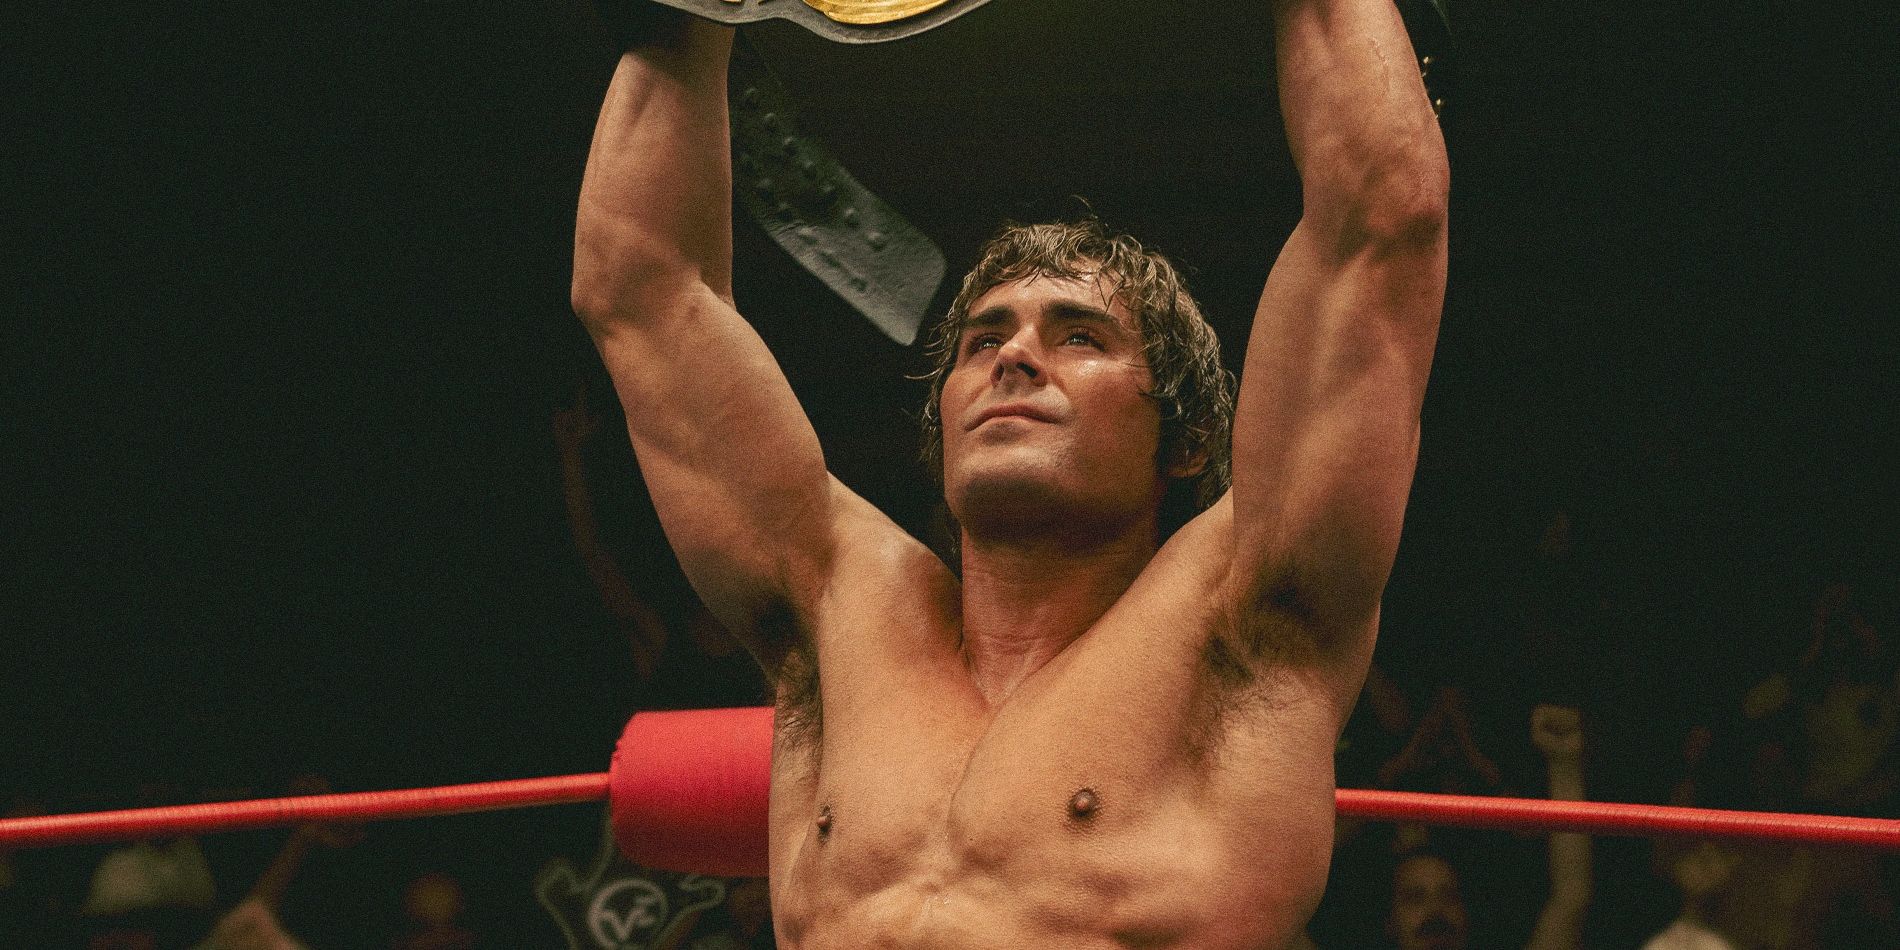 Zac Efron as wrestler Kevin Von Erich in The Iron Claw in the ring holding up a championship belt